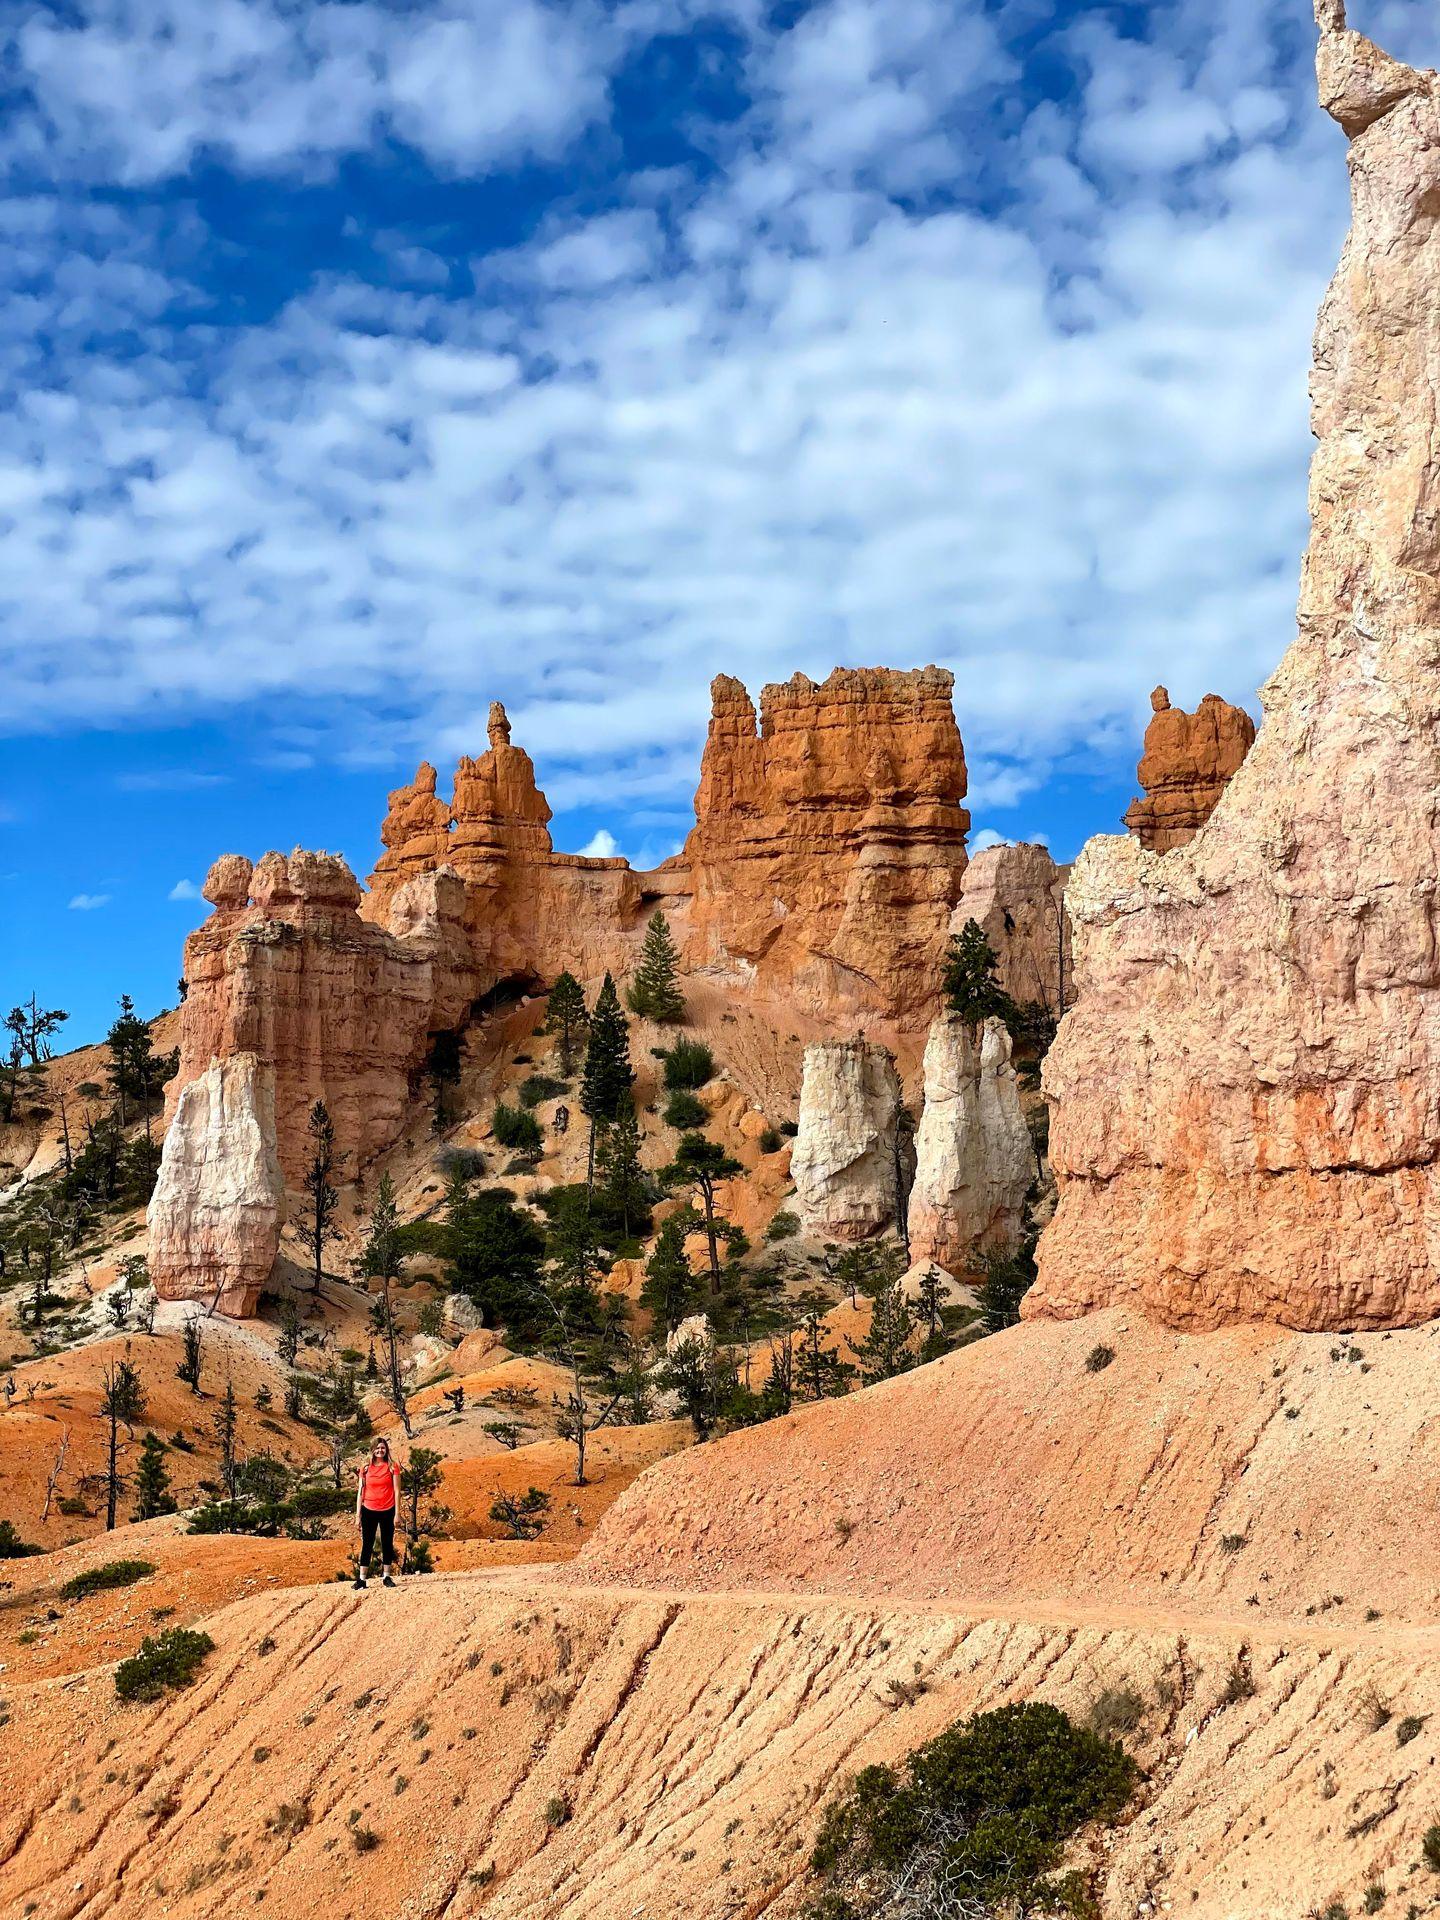 Lydia standing on the Fairyland Loop trail with hoodoo rock formations in the background.